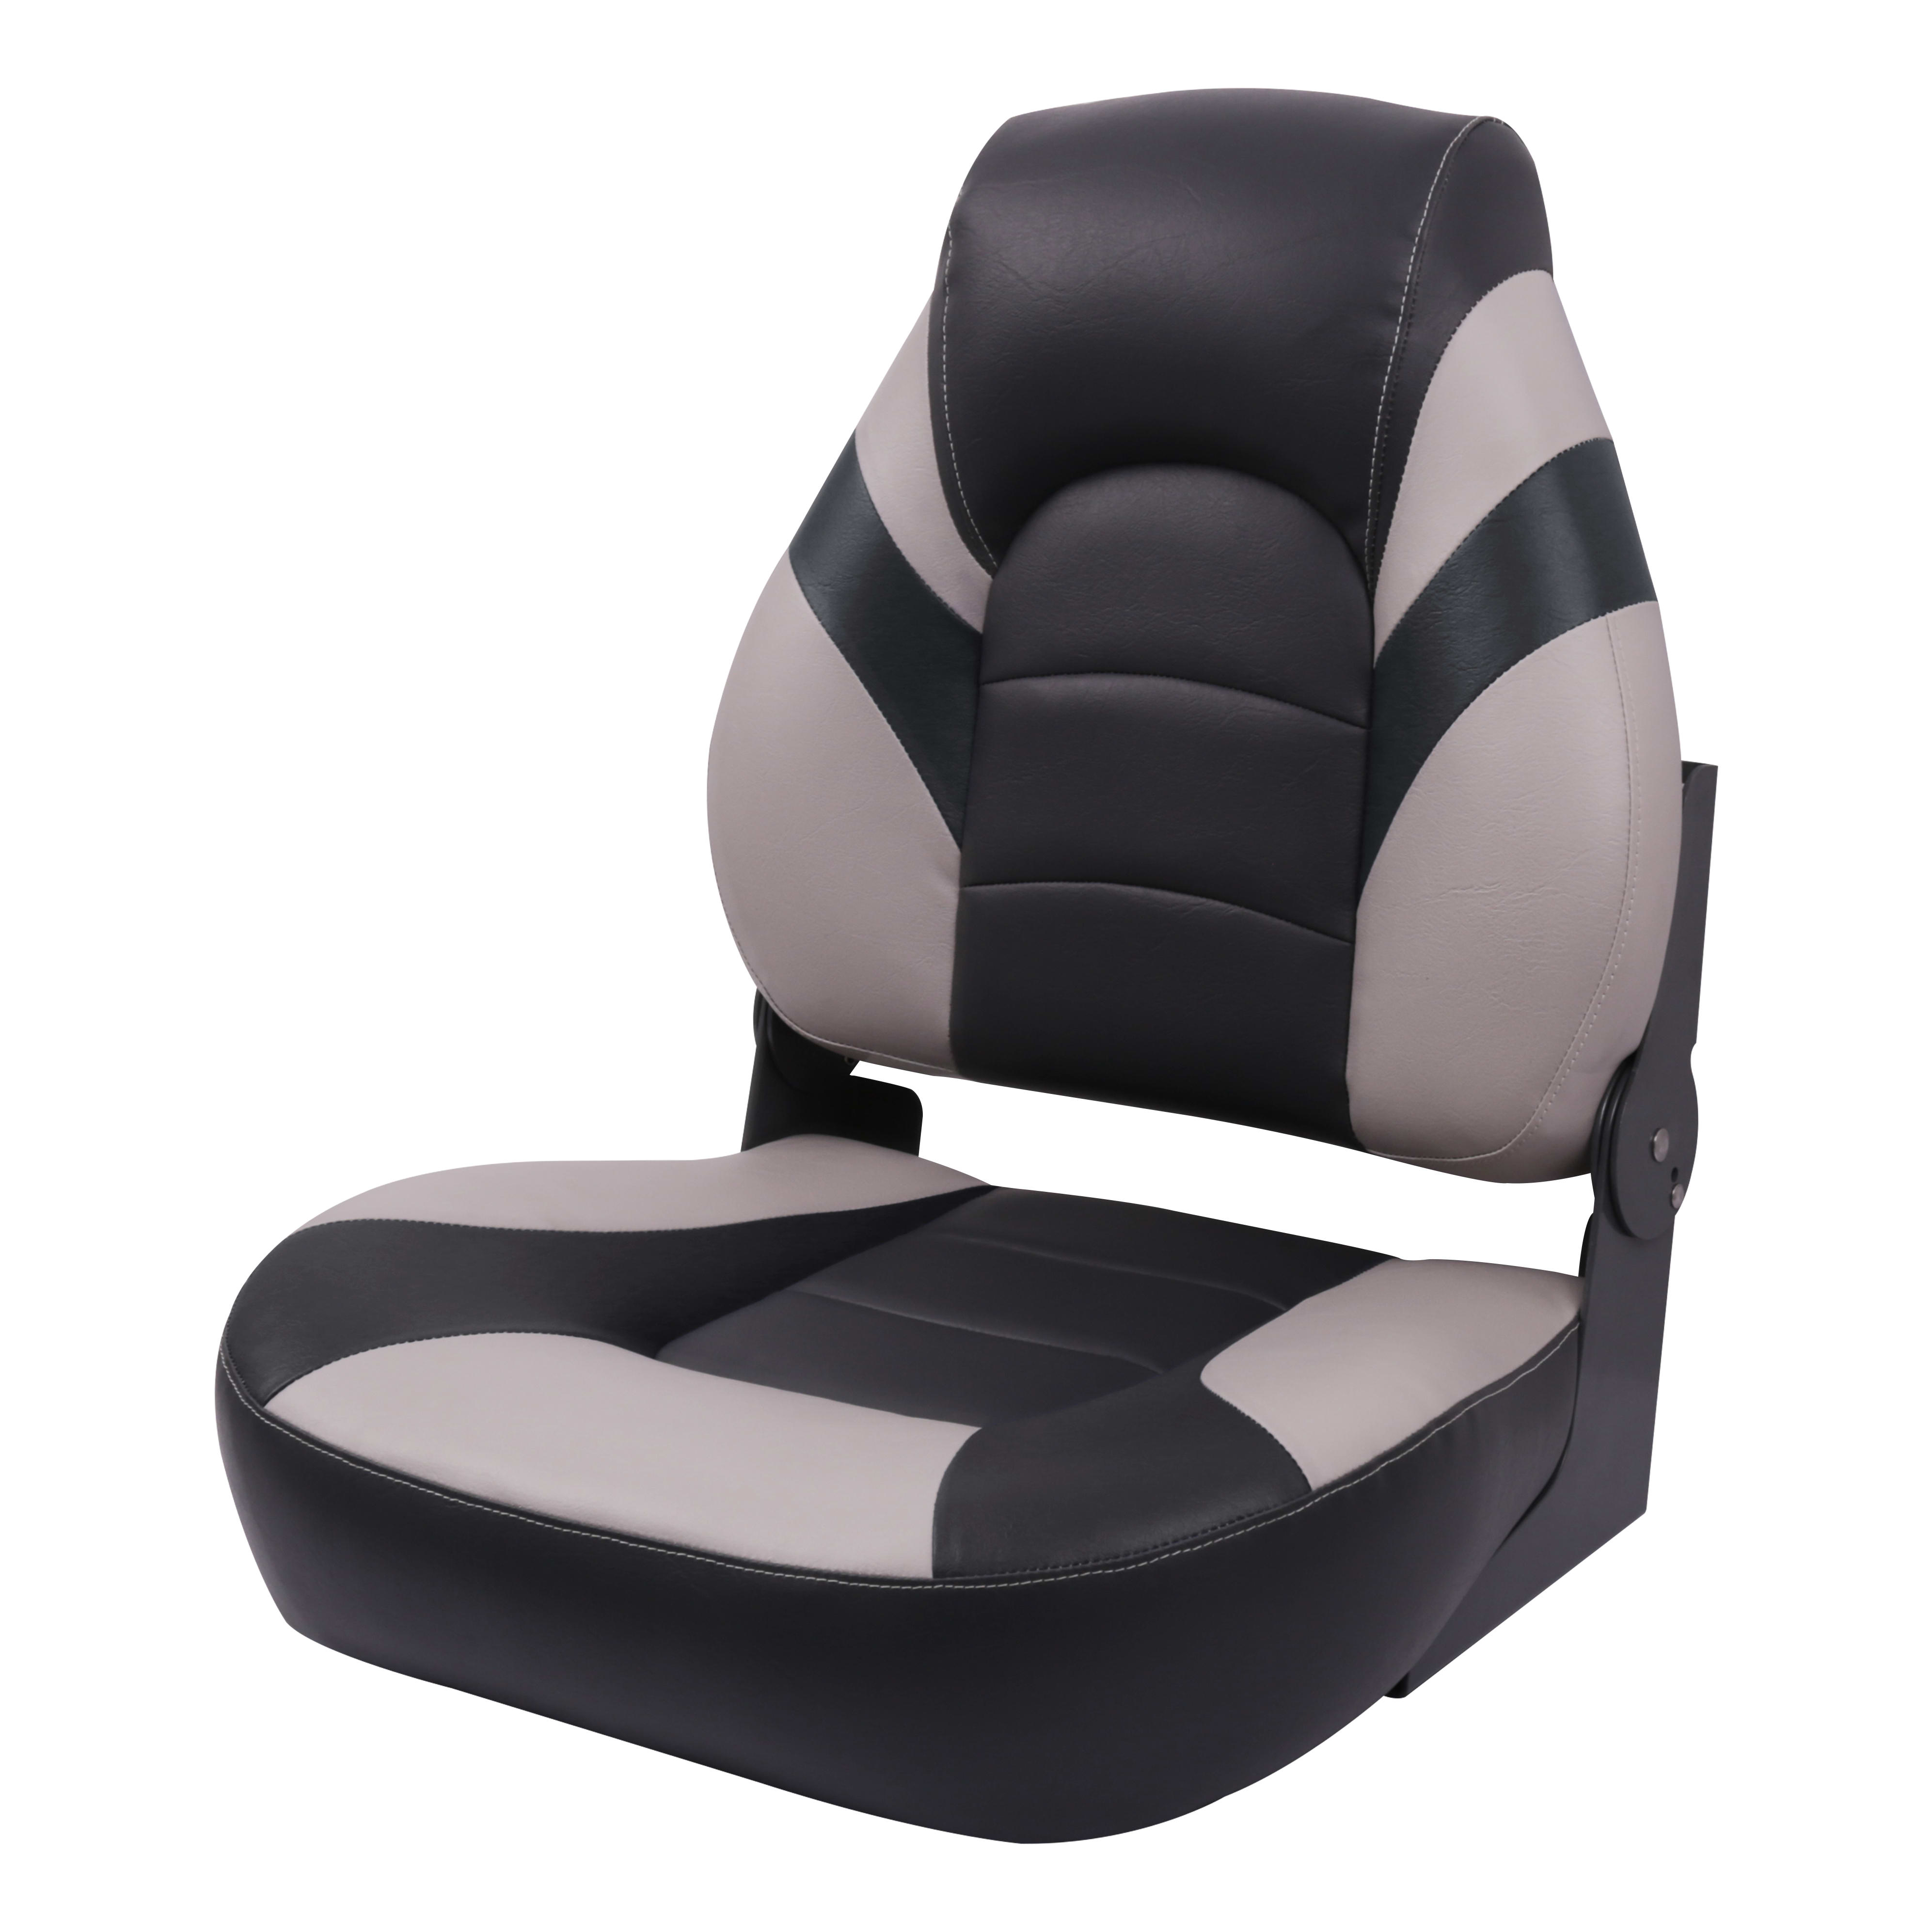 Bass Pro Shops Extreme Boat Seat - Cabelas - BASS PRO - Seating